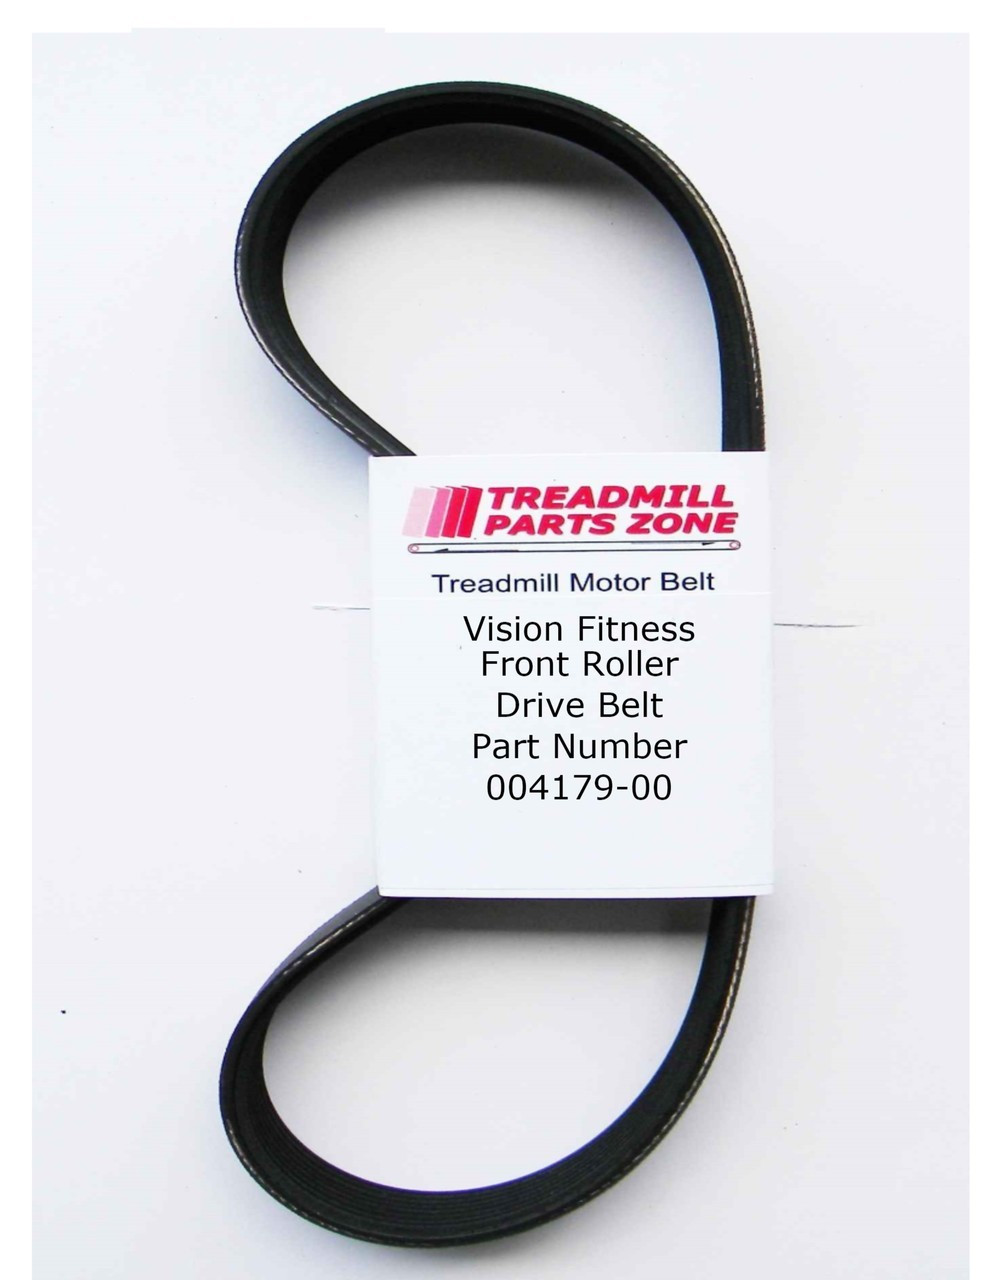 Vision Treadmill Model T9700 RUNNERS Front Roller Drive Belt Part Number 004179-00